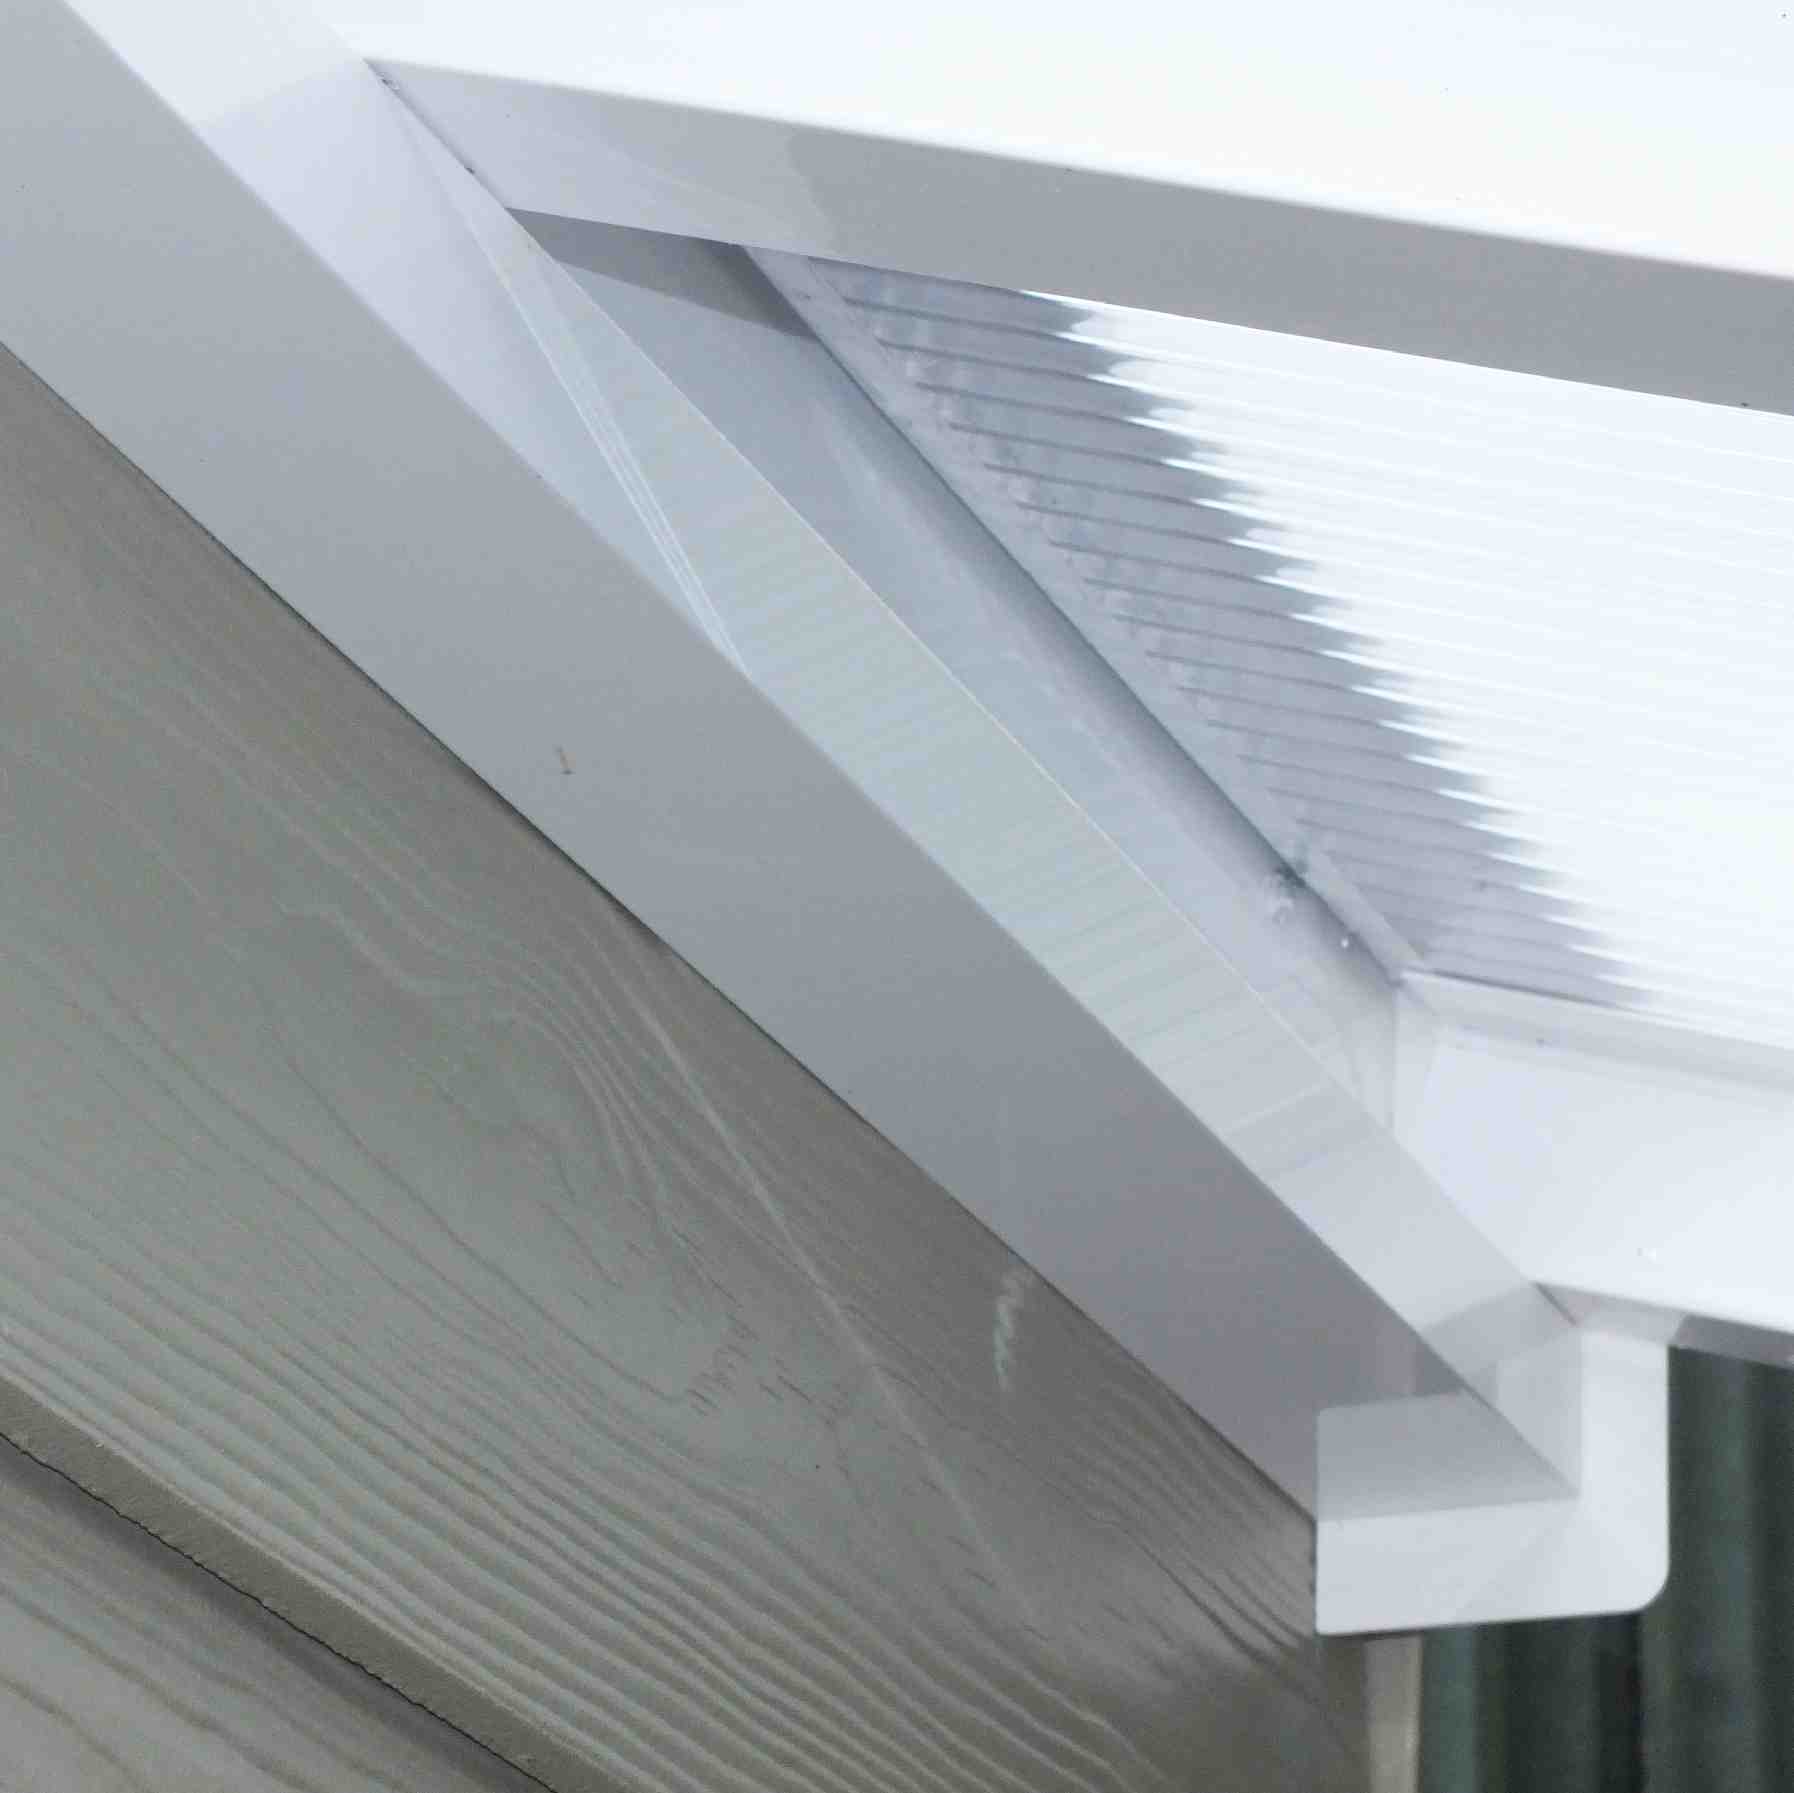 Great deals on Omega Verandah White with 16mm Polycarbonate Glazing - 8.4m (W) x 4.5m (P), (4) Supporting Posts